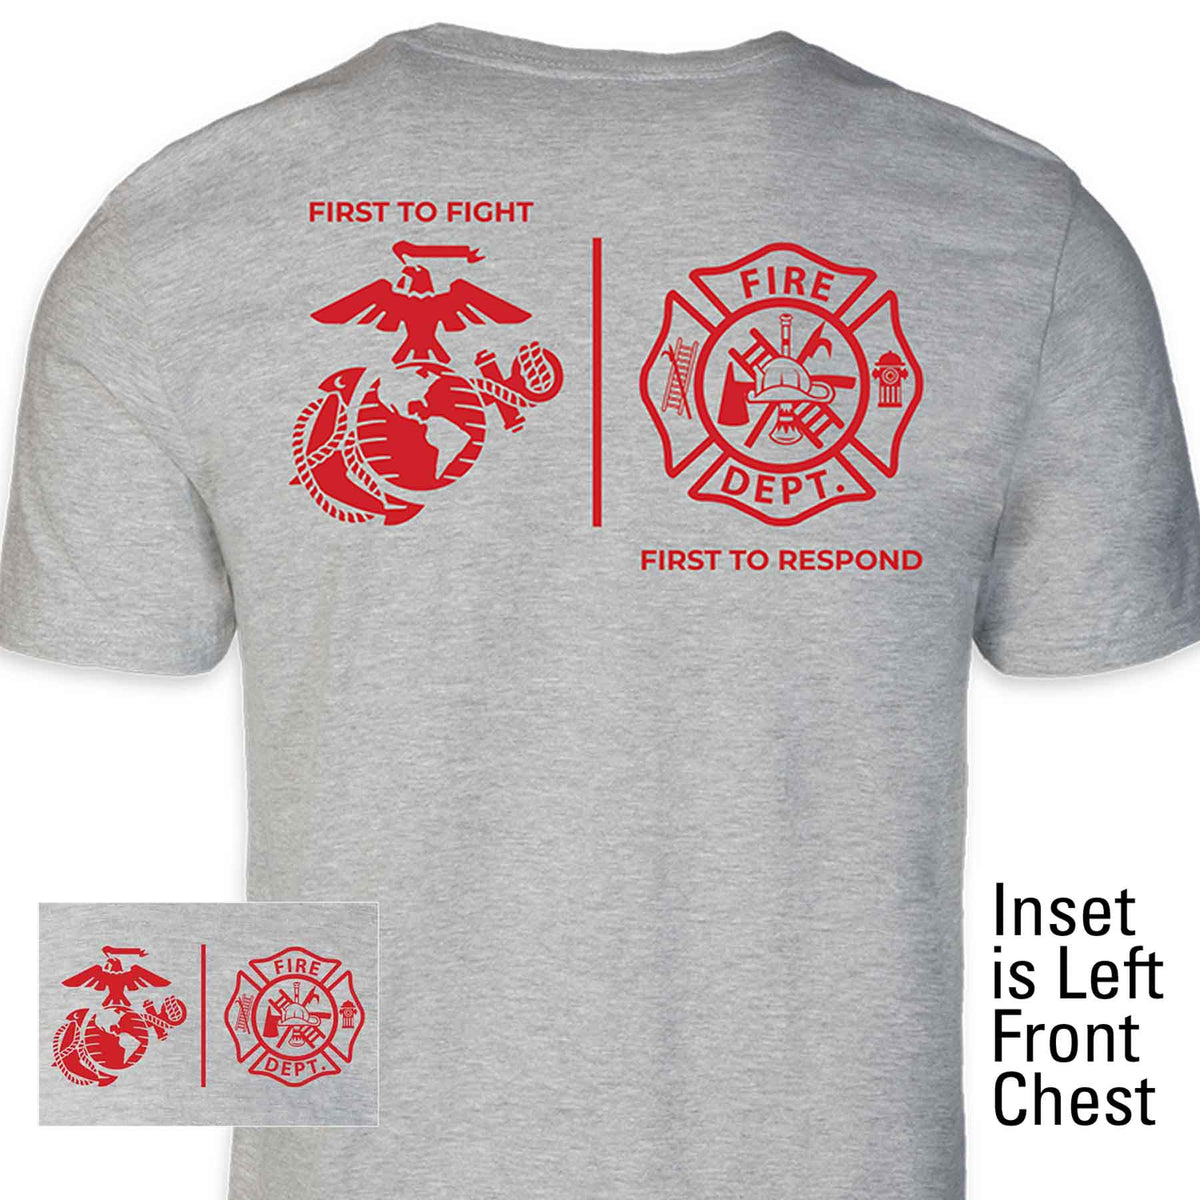 USMC First Responders Fire T-Shirt - L / Gray by Sgt Grit